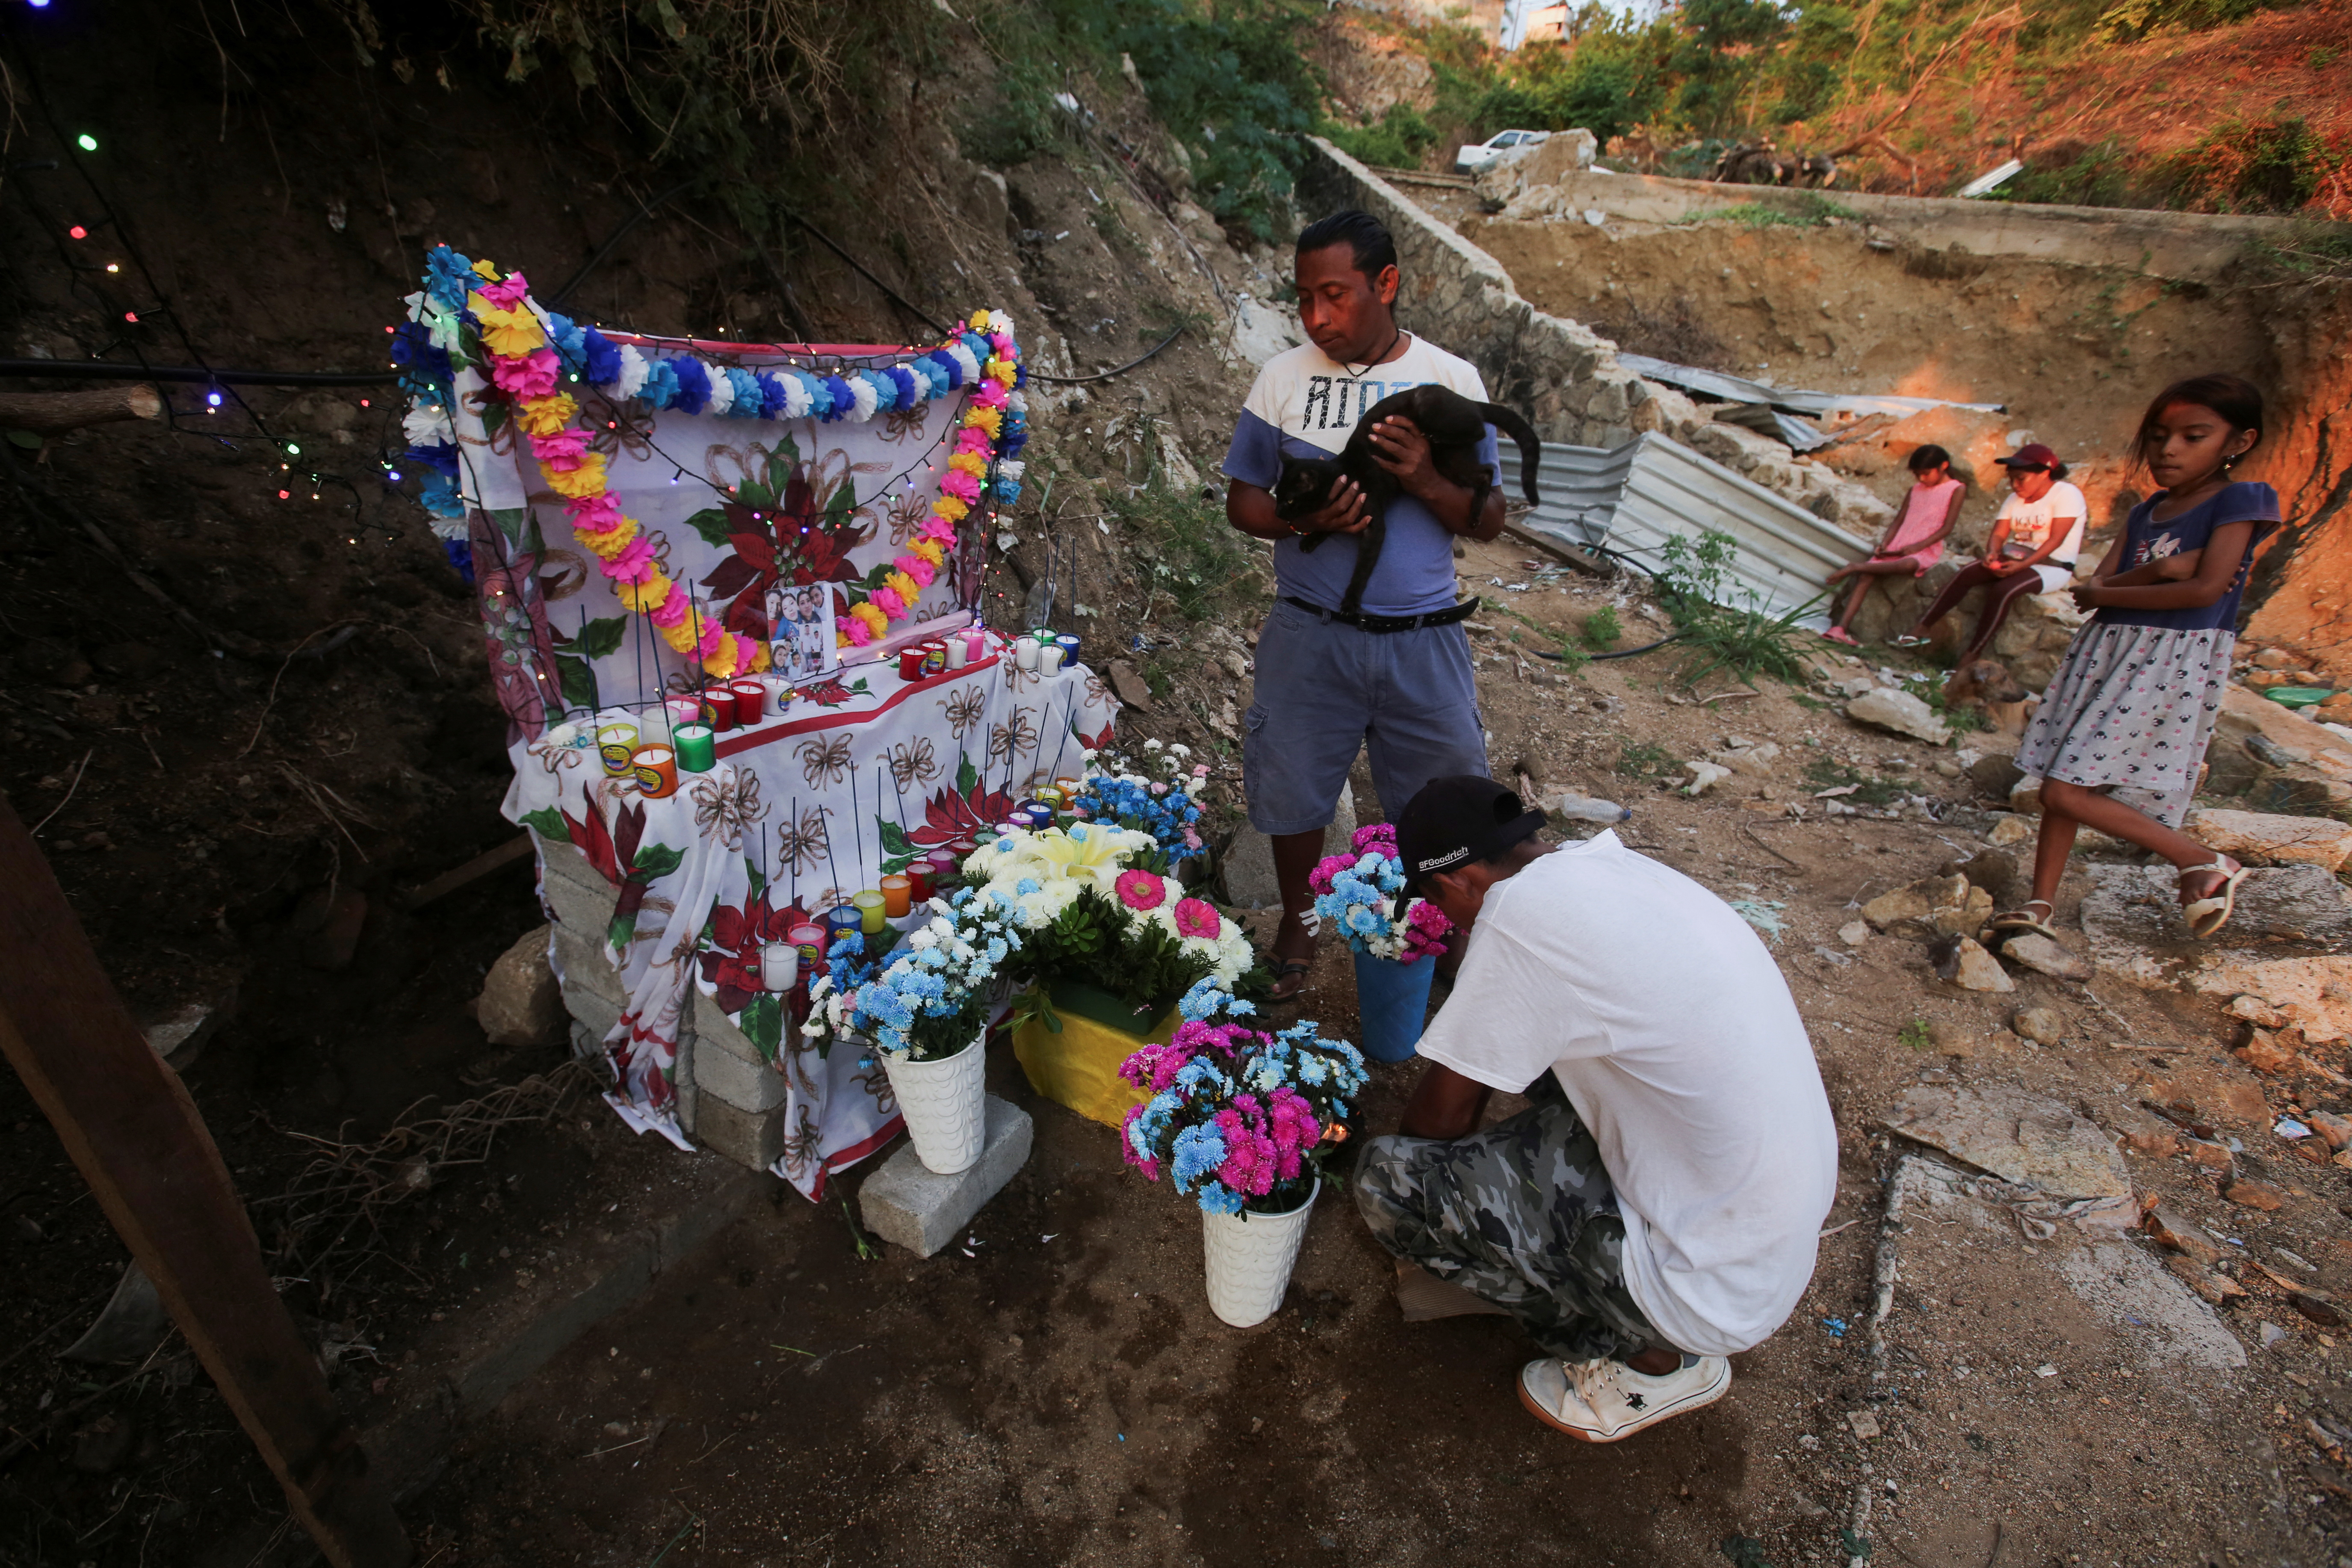 Candido Trinidad de la Cruz, who lost his family and home during Hurricane Otis, places an altar in their memory, in Acapulco